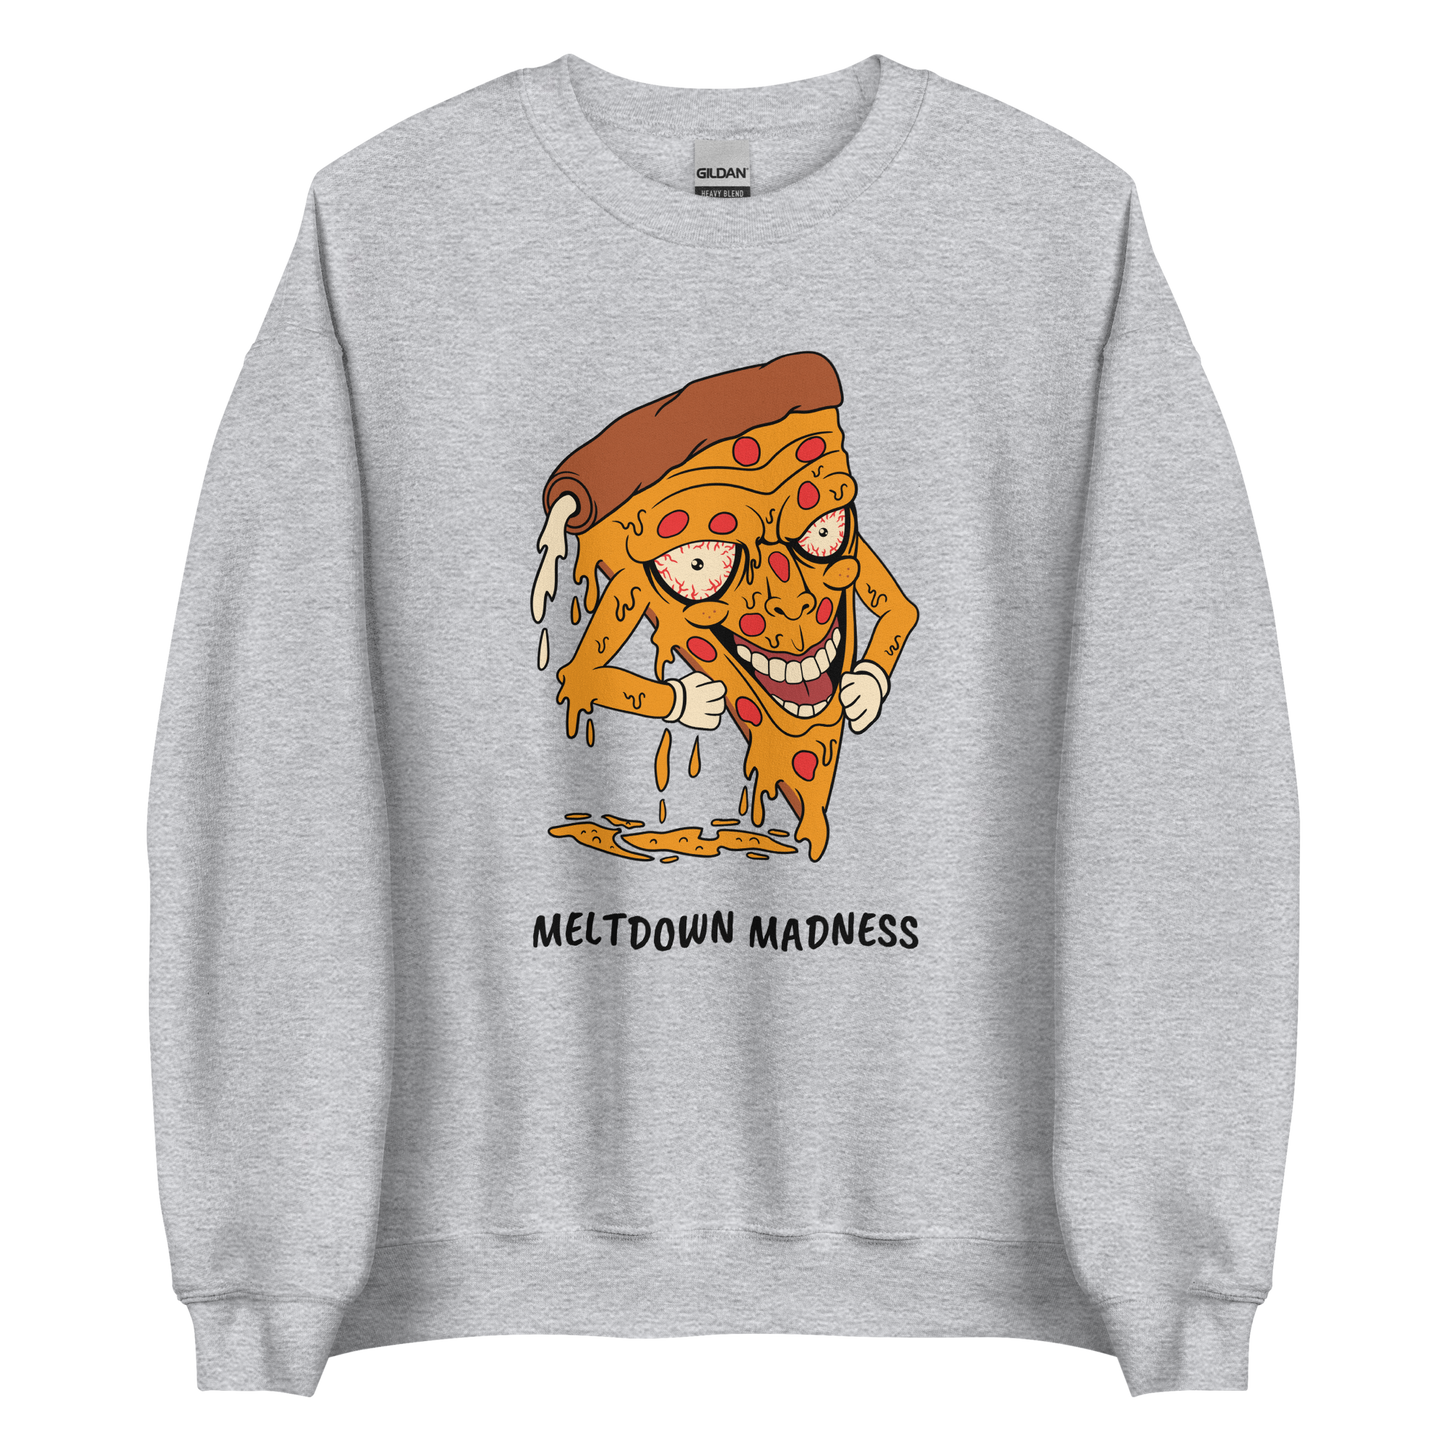 Sport Grey Melting Pizza Sweatshirt featuring a Meltdown Madness graphic on the chest - Funny Graphic Pizza Sweatshirts - Boozy Fox